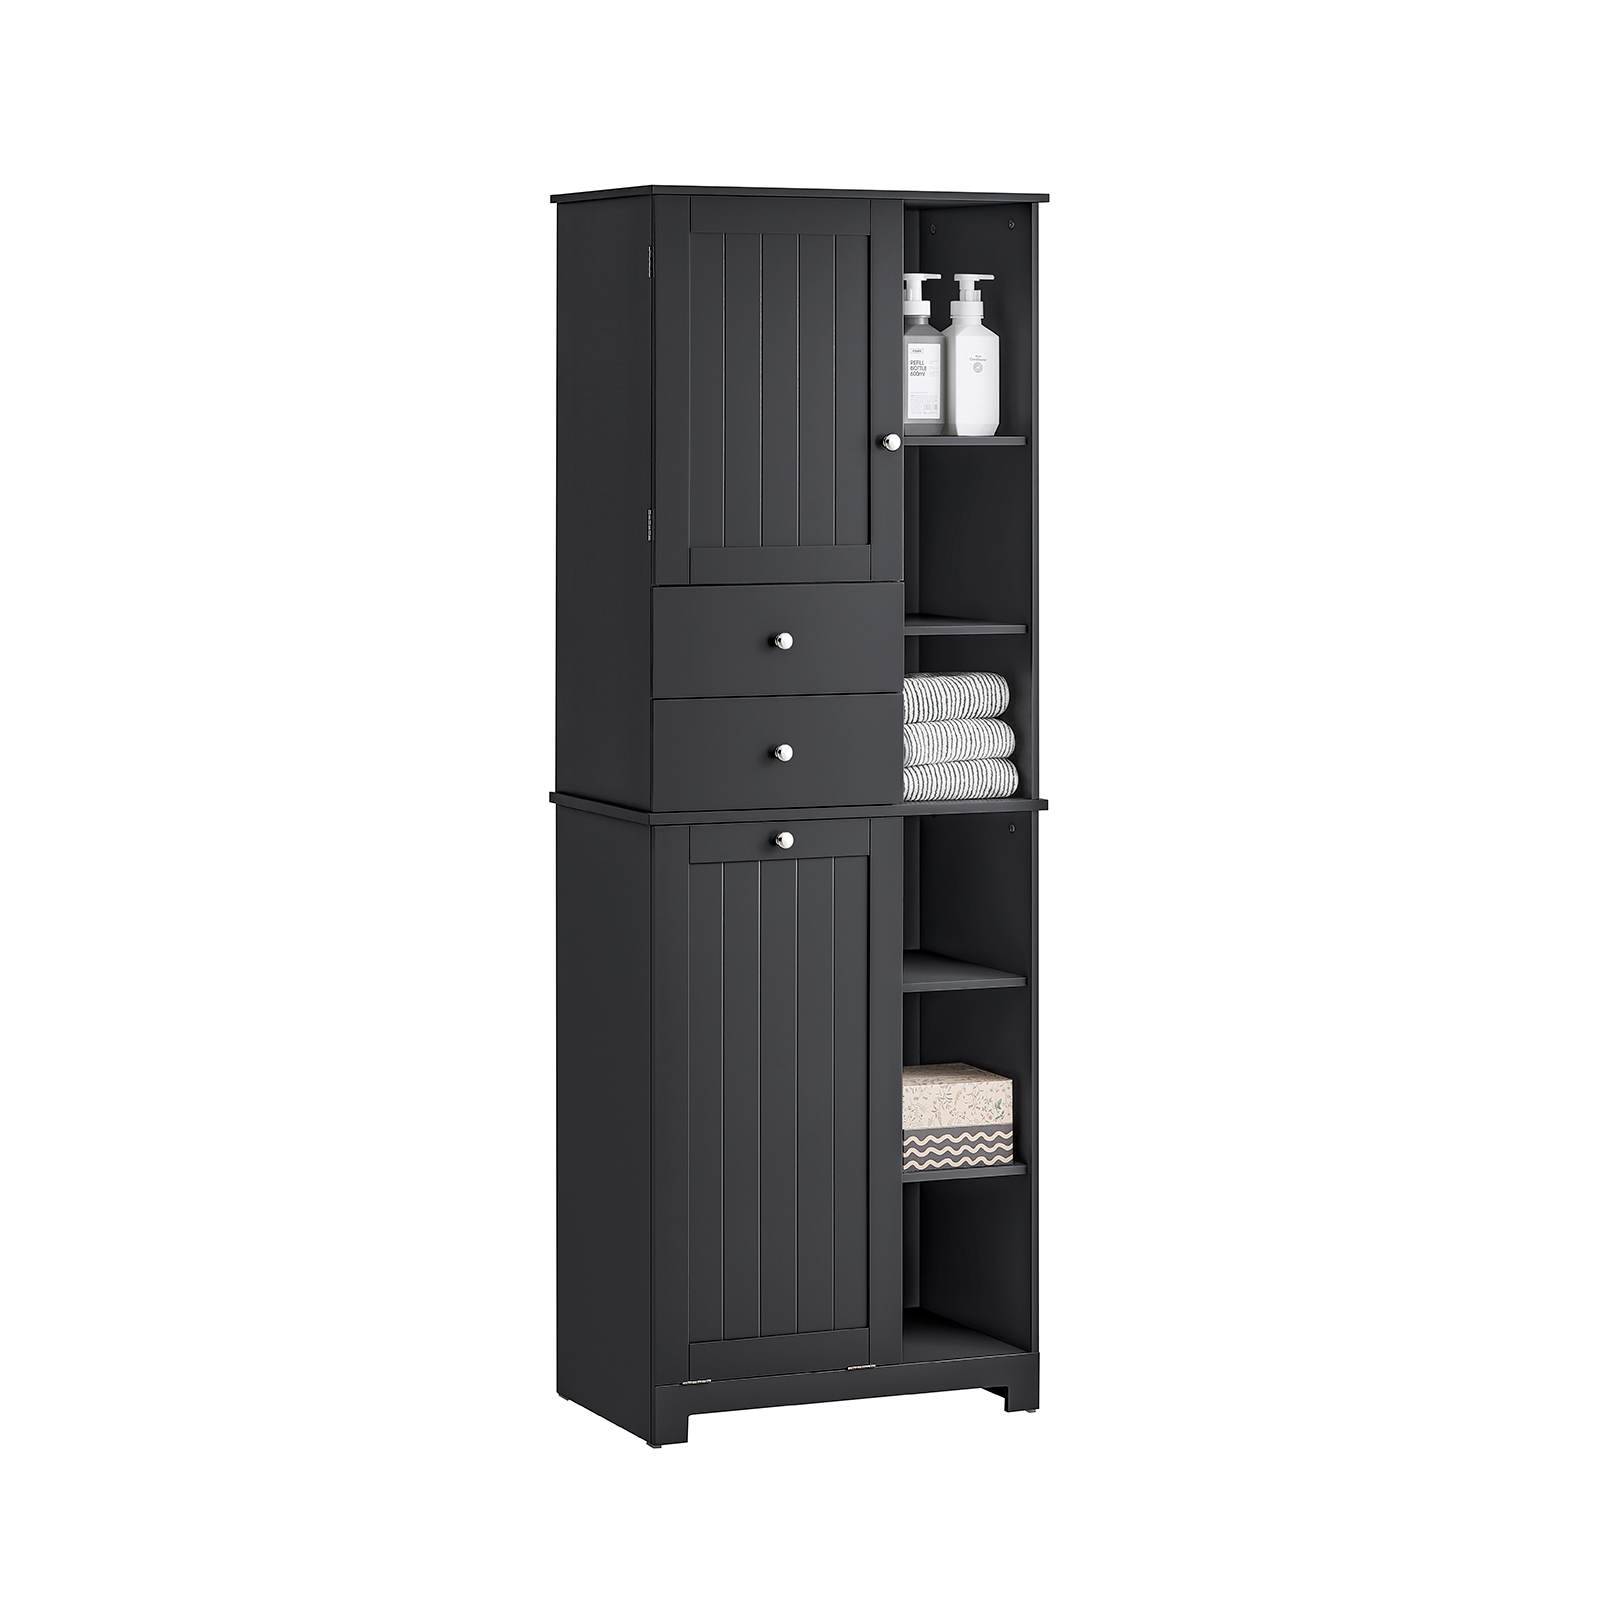 SoBuy Bathroom Tall Cupboard Storage Cabinet with Laundry Basket Laundry Chest BZR104-SCH